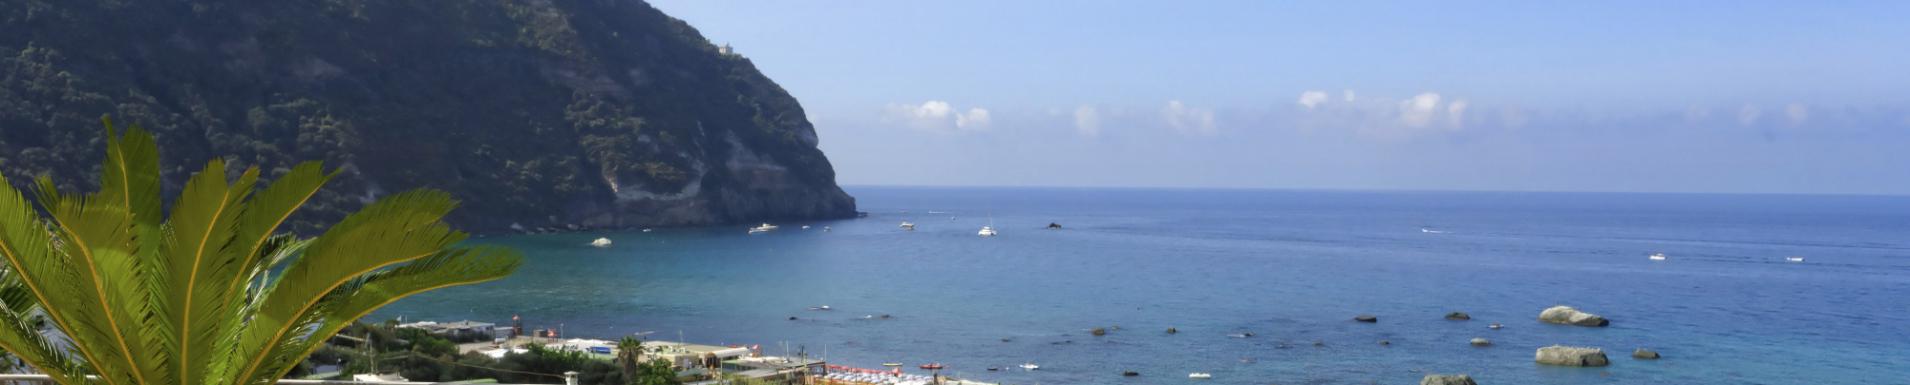 A New season begins: May offer in Ischia for 7 nights stay